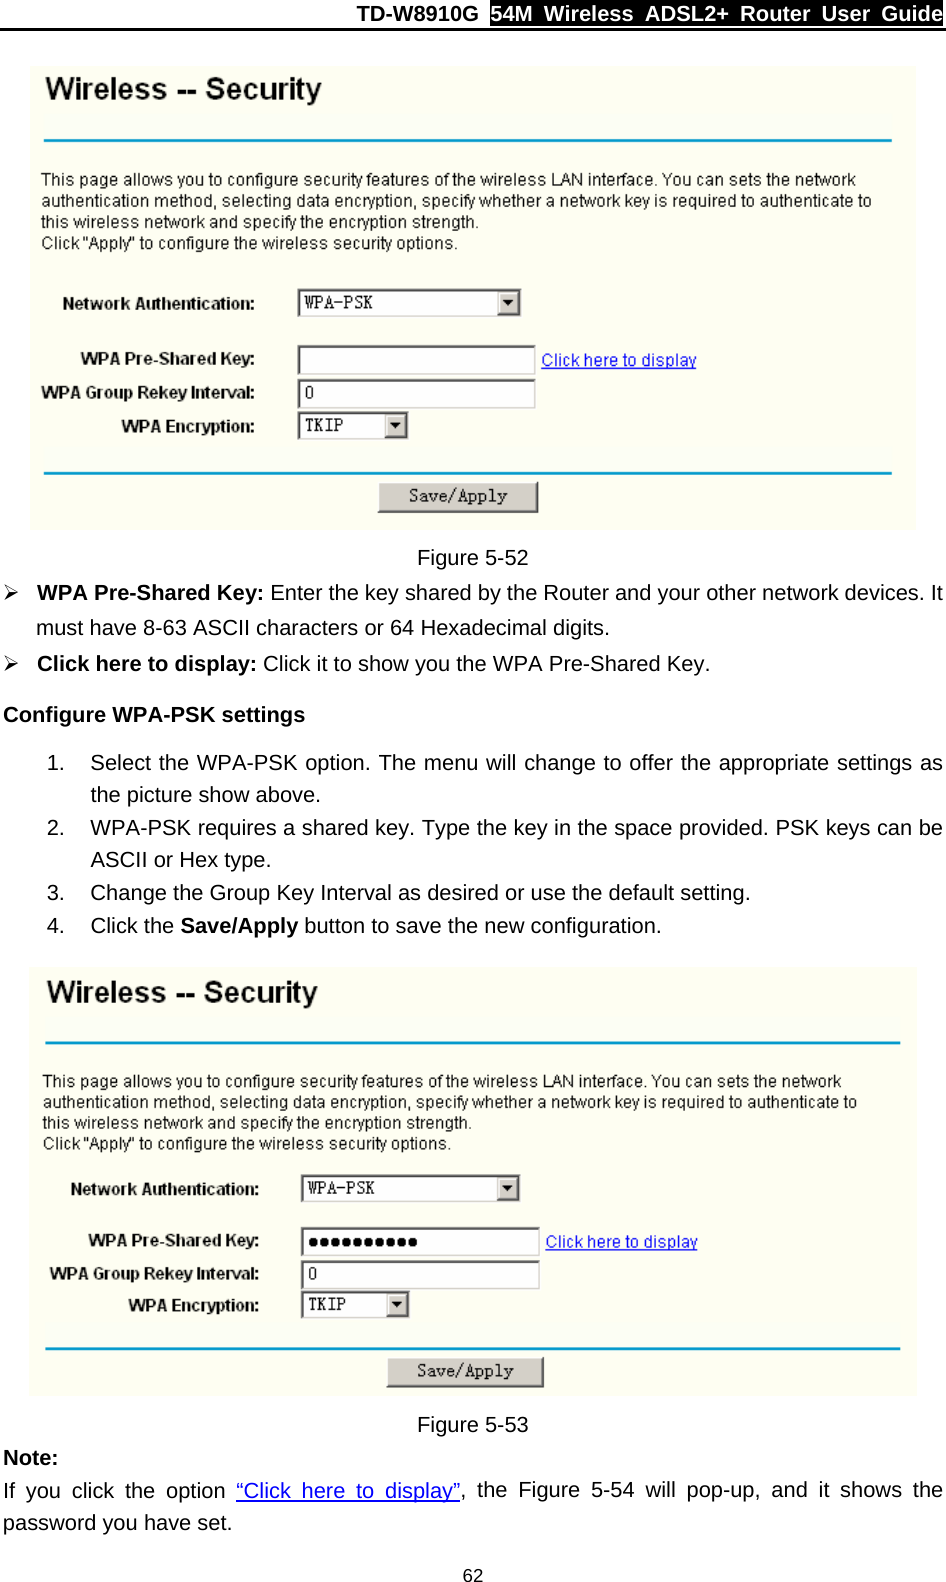 TD-W8910G  54M Wireless ADSL2+ Router User Guide  62 Figure 5-52 ¾ WPA Pre-Shared Key: Enter the key shared by the Router and your other network devices. It must have 8-63 ASCII characters or 64 Hexadecimal digits. ¾ Click here to display: Click it to show you the WPA Pre-Shared Key. Configure WPA-PSK settings 1.  Select the WPA-PSK option. The menu will change to offer the appropriate settings as the picture show above. 2.  WPA-PSK requires a shared key. Type the key in the space provided. PSK keys can be ASCII or Hex type. 3.  Change the Group Key Interval as desired or use the default setting. 4. Click the Save/Apply button to save the new configuration.  Figure 5-53 Note: If you click the option “Click here to display”, the Figure 5-54 will pop-up, and it shows the password you have set. 